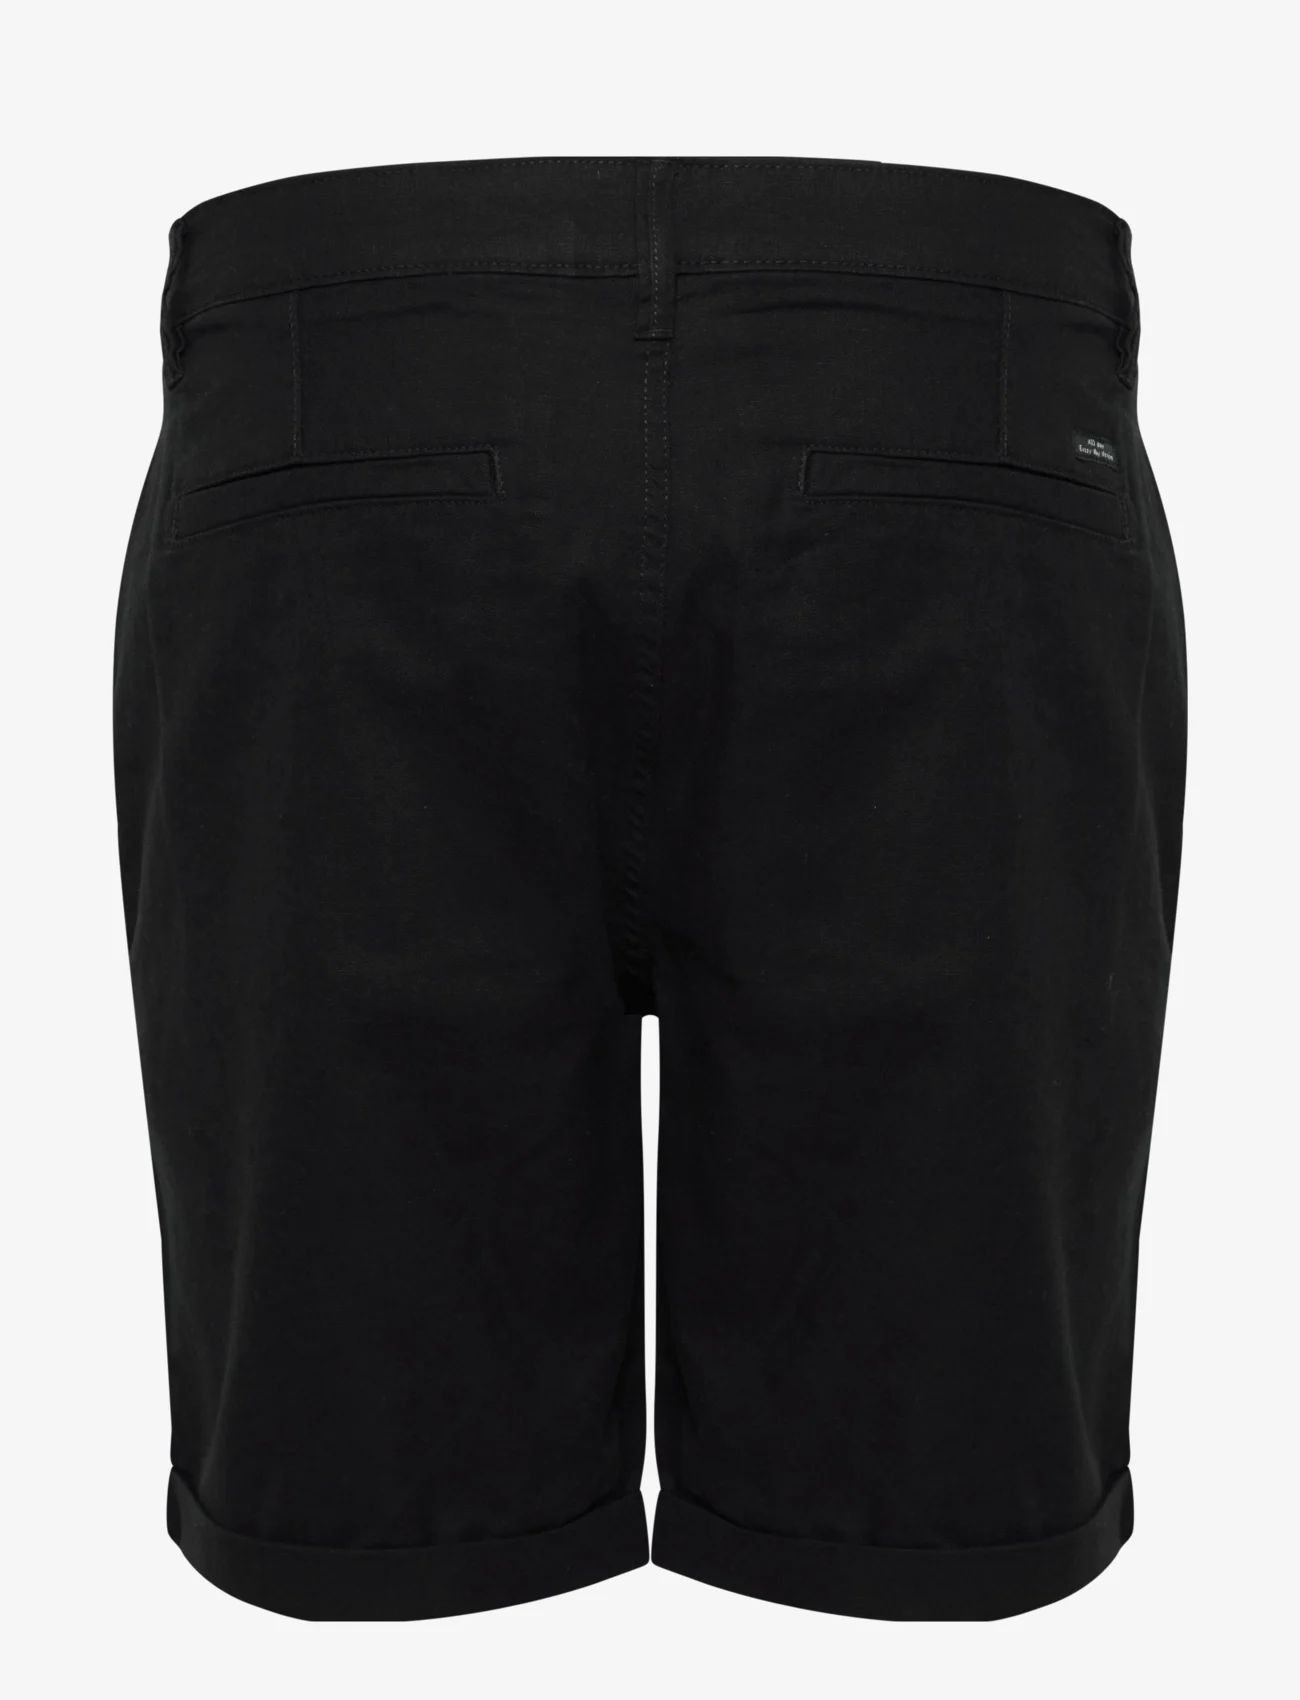 Blend - Shorts - lowest prices - black - 1